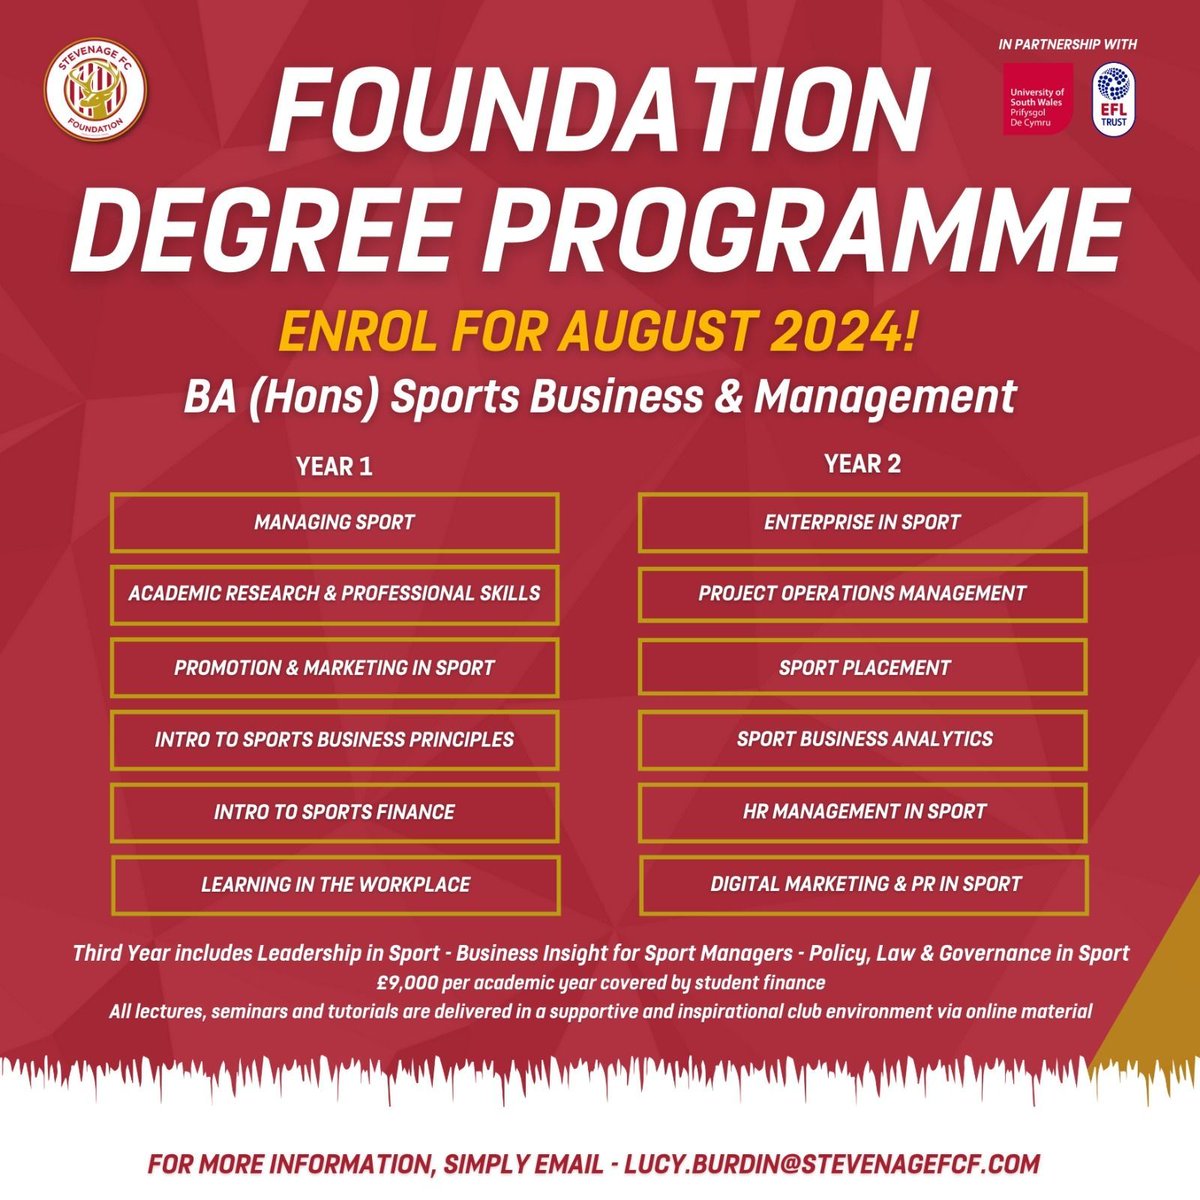 Fancy kickstarting your career in the football industry with a League One club? 📈 Contact Lucy to enquire!👇 📧Lucy.Burdin@Stevenagefcf.com ☎️07510380635 #foundation #foundationdegree #university #stevenagefc #stevenagefcf